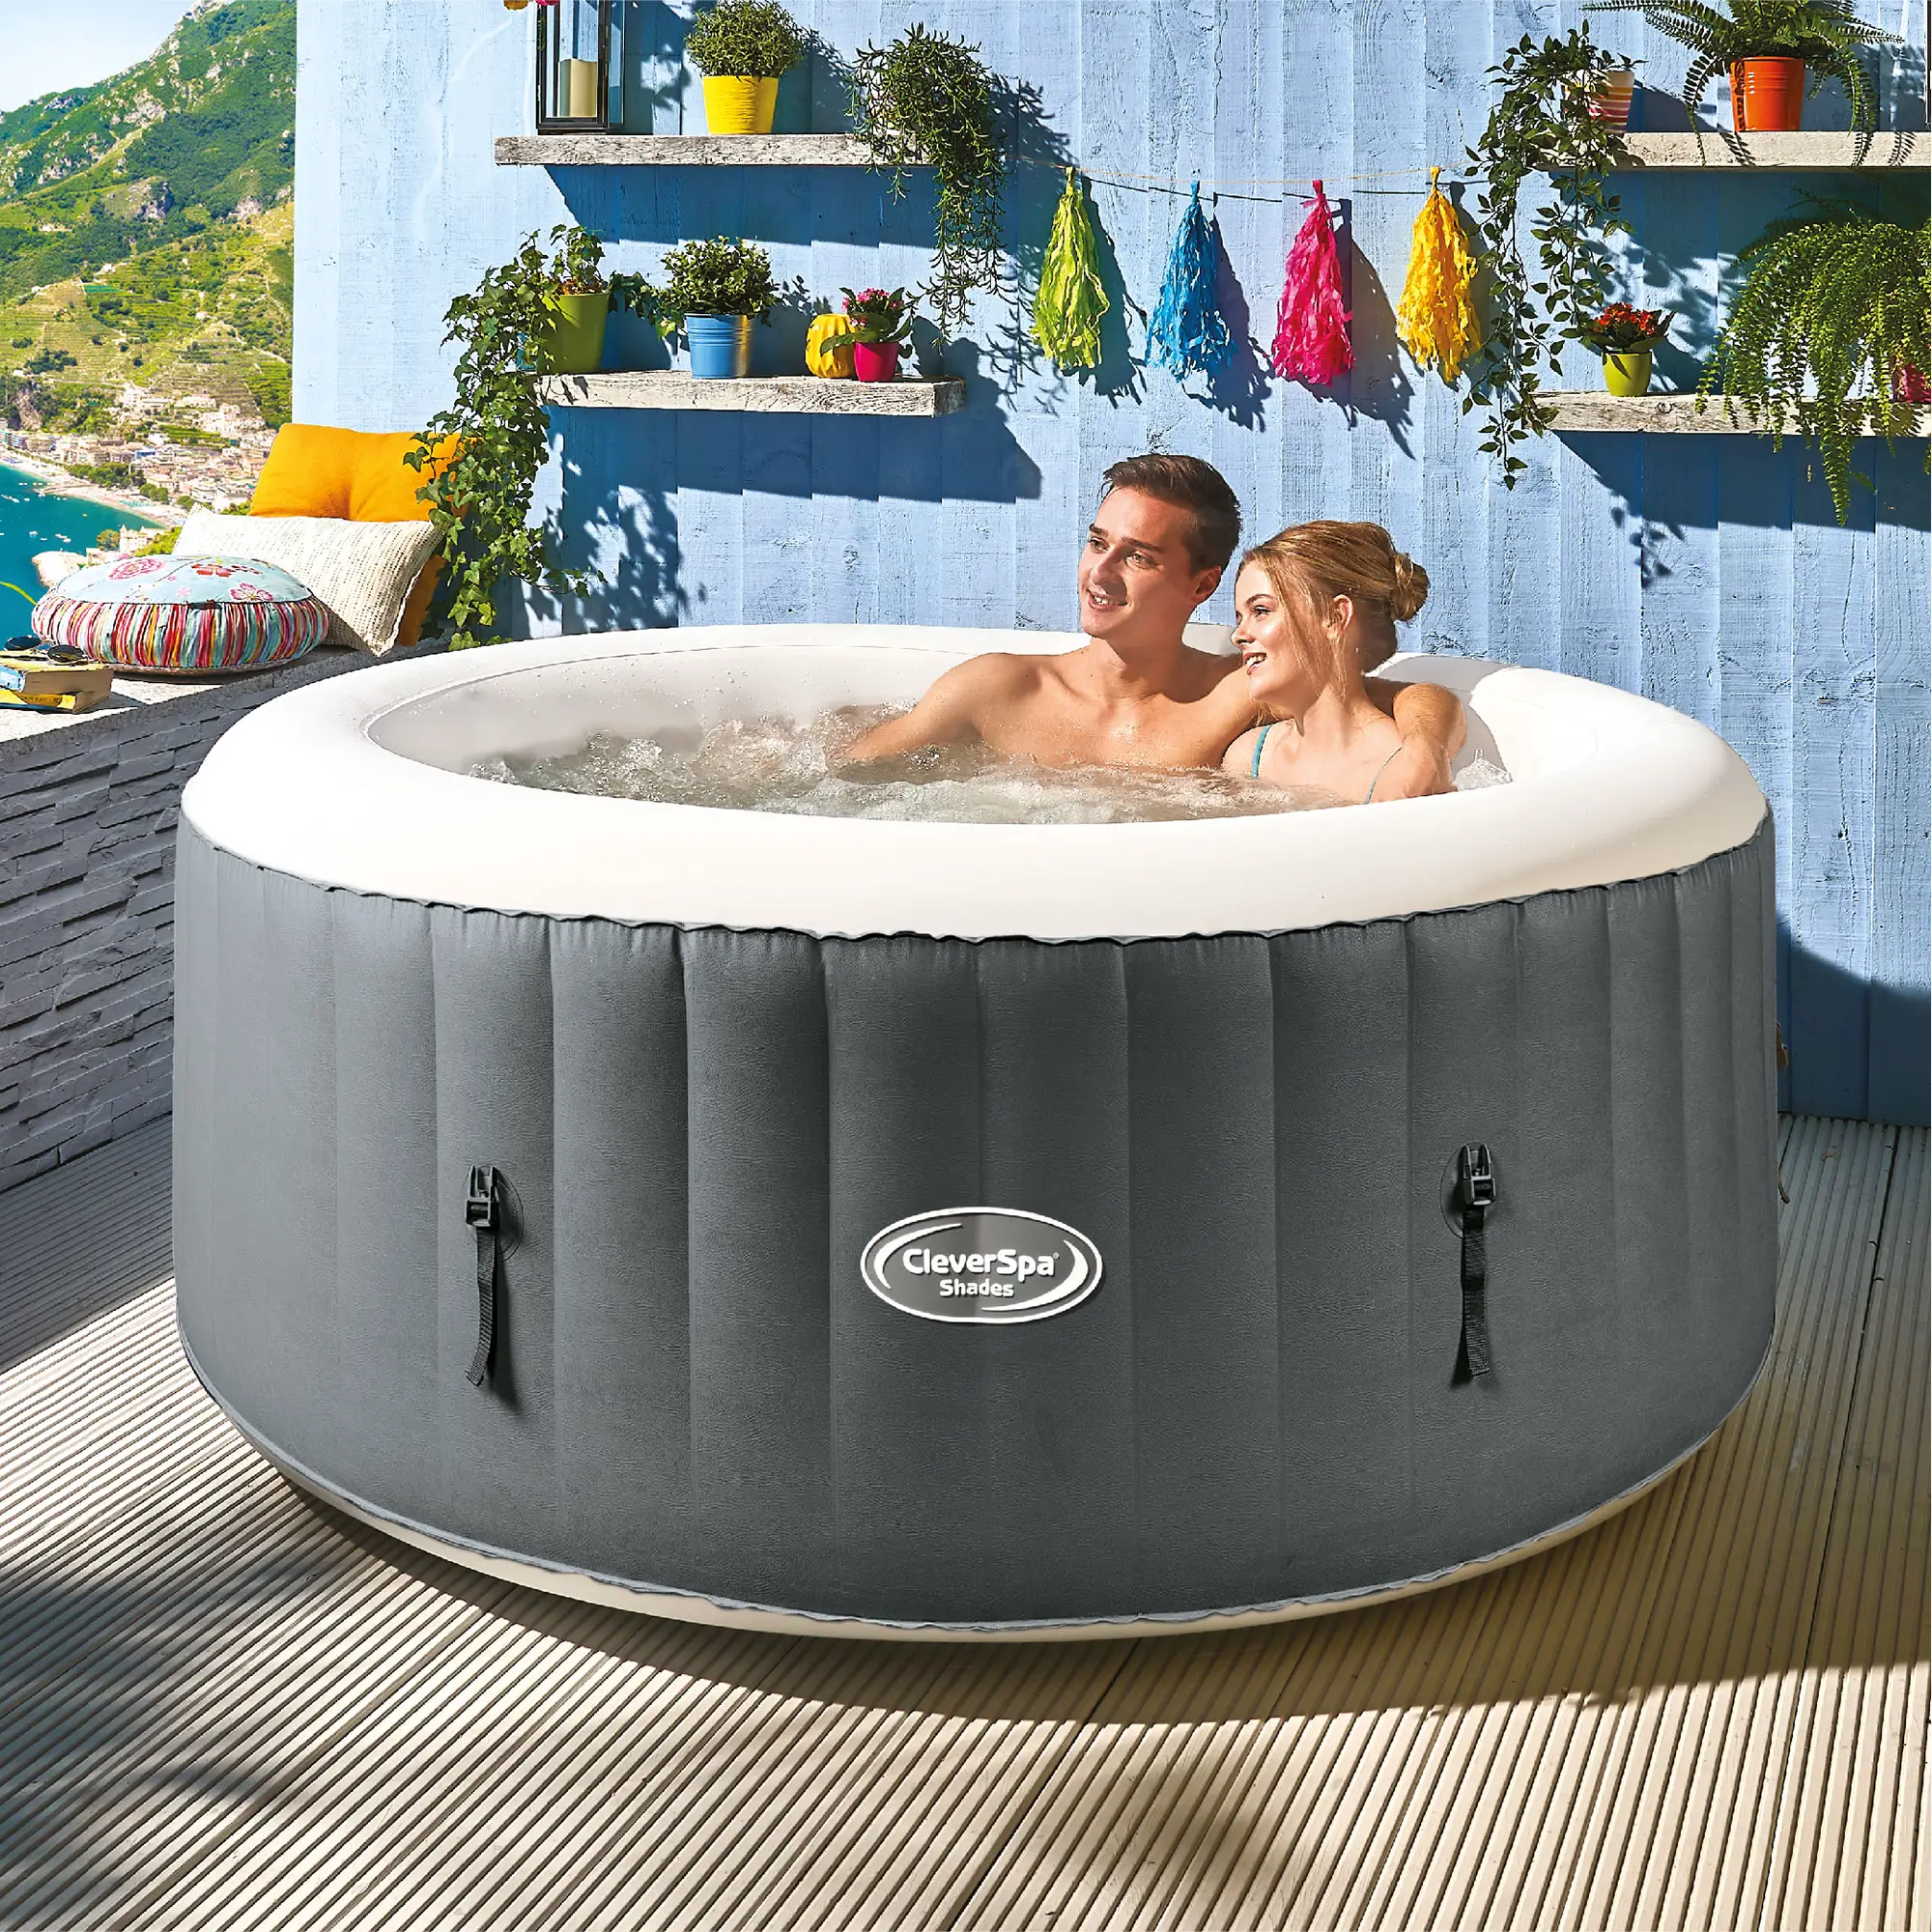 CleverSpa Shades 800 Liter 70 inch 4 Person Inflatable Round Hot Tub ...